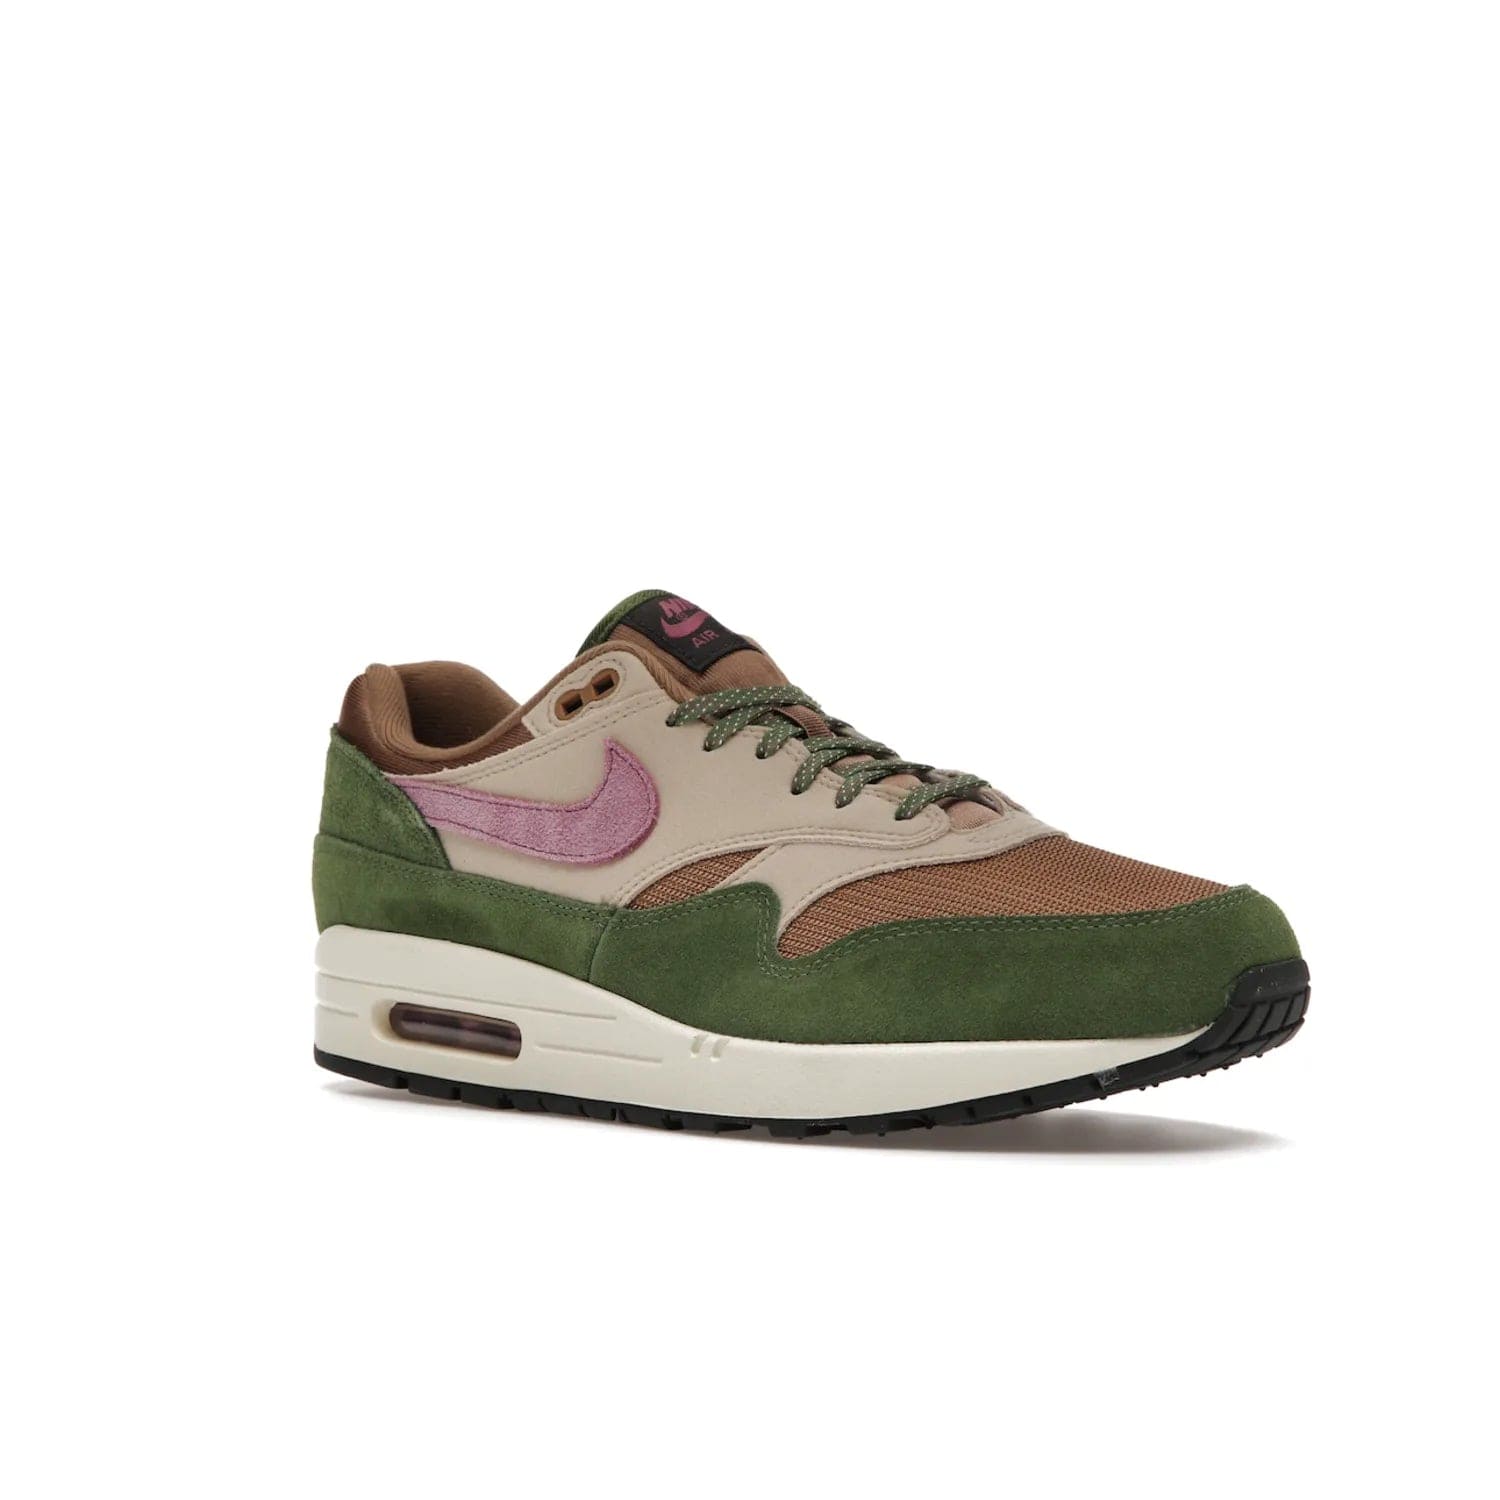 Nike Air Max 1 SH Treeline - Image 5 - Only at www.BallersClubKickz.com - A classic Nike Air Max 1 SH Treeline with a brown mesh upper, taupe Durabuck overlays, and hairy green suede details. Light Bordeaux Swoosh and woven tongue label for a pop of color. Released in May 2022. Perfect for any outfit and sure to impress.